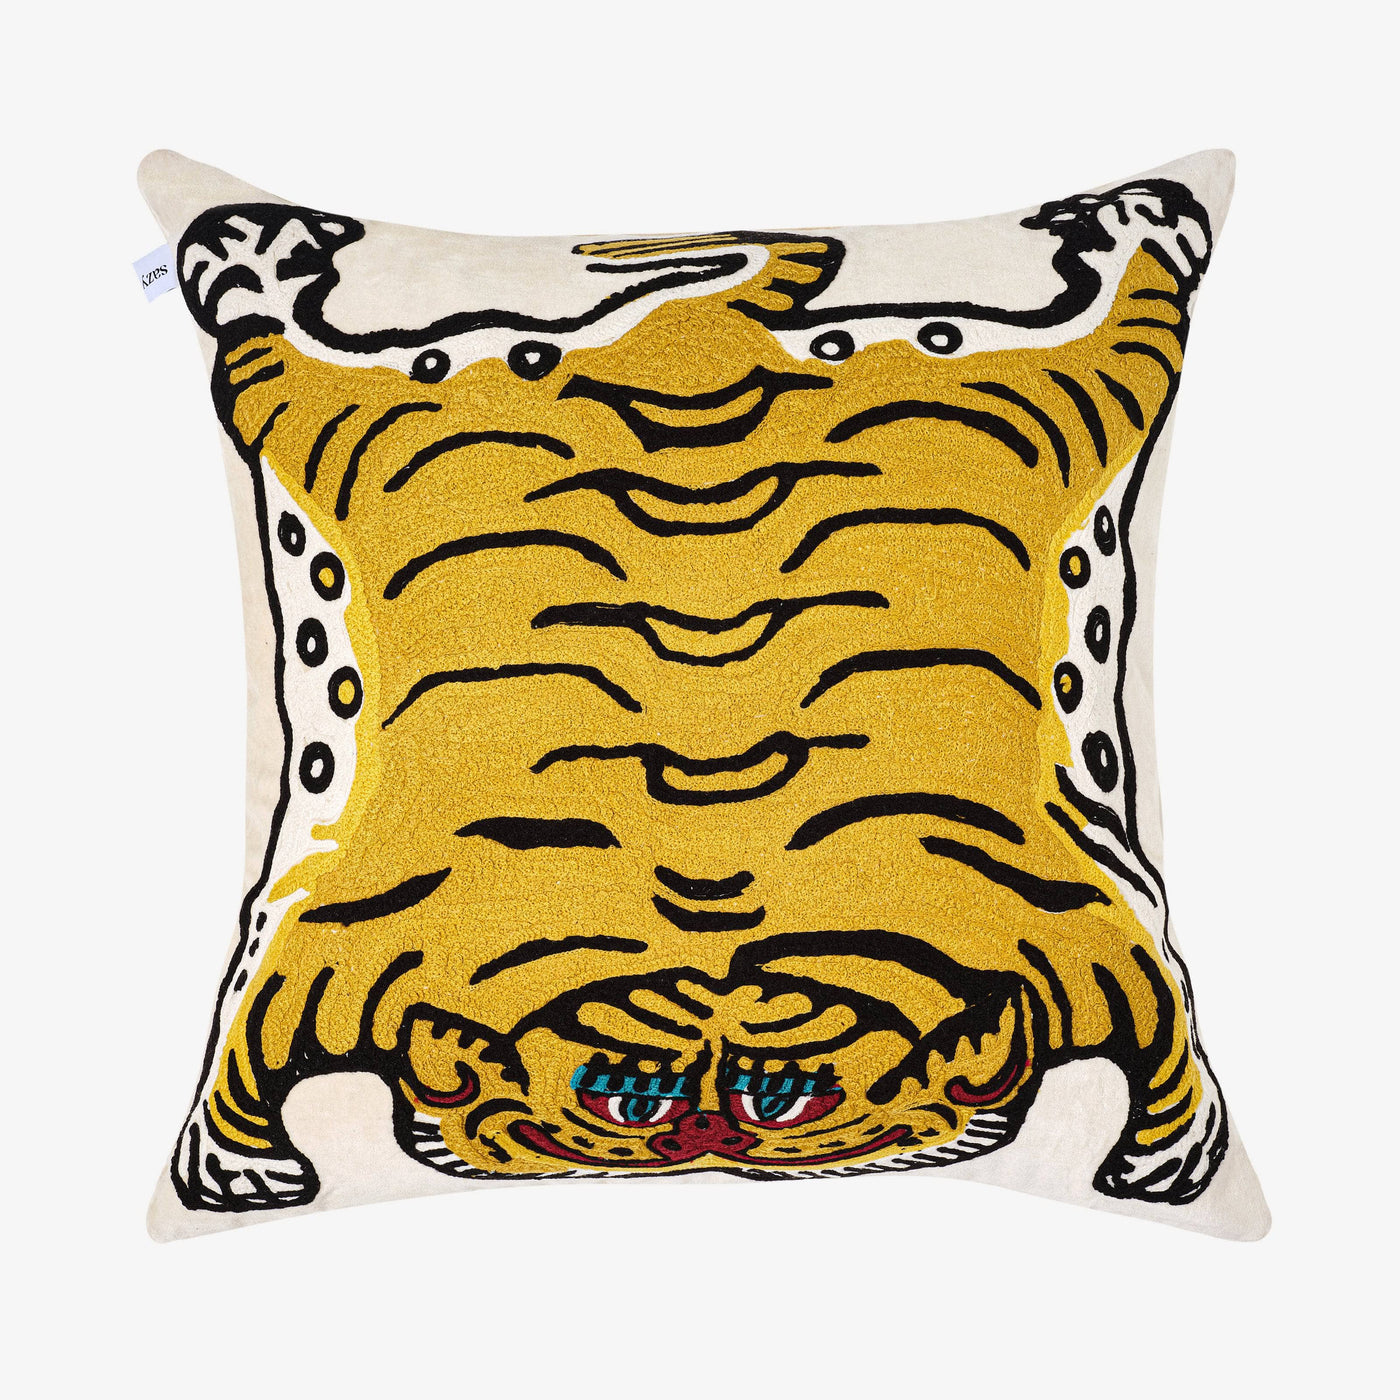 Shere Tiger Cushion Cover, White - Mustard, 60x60 cm 1